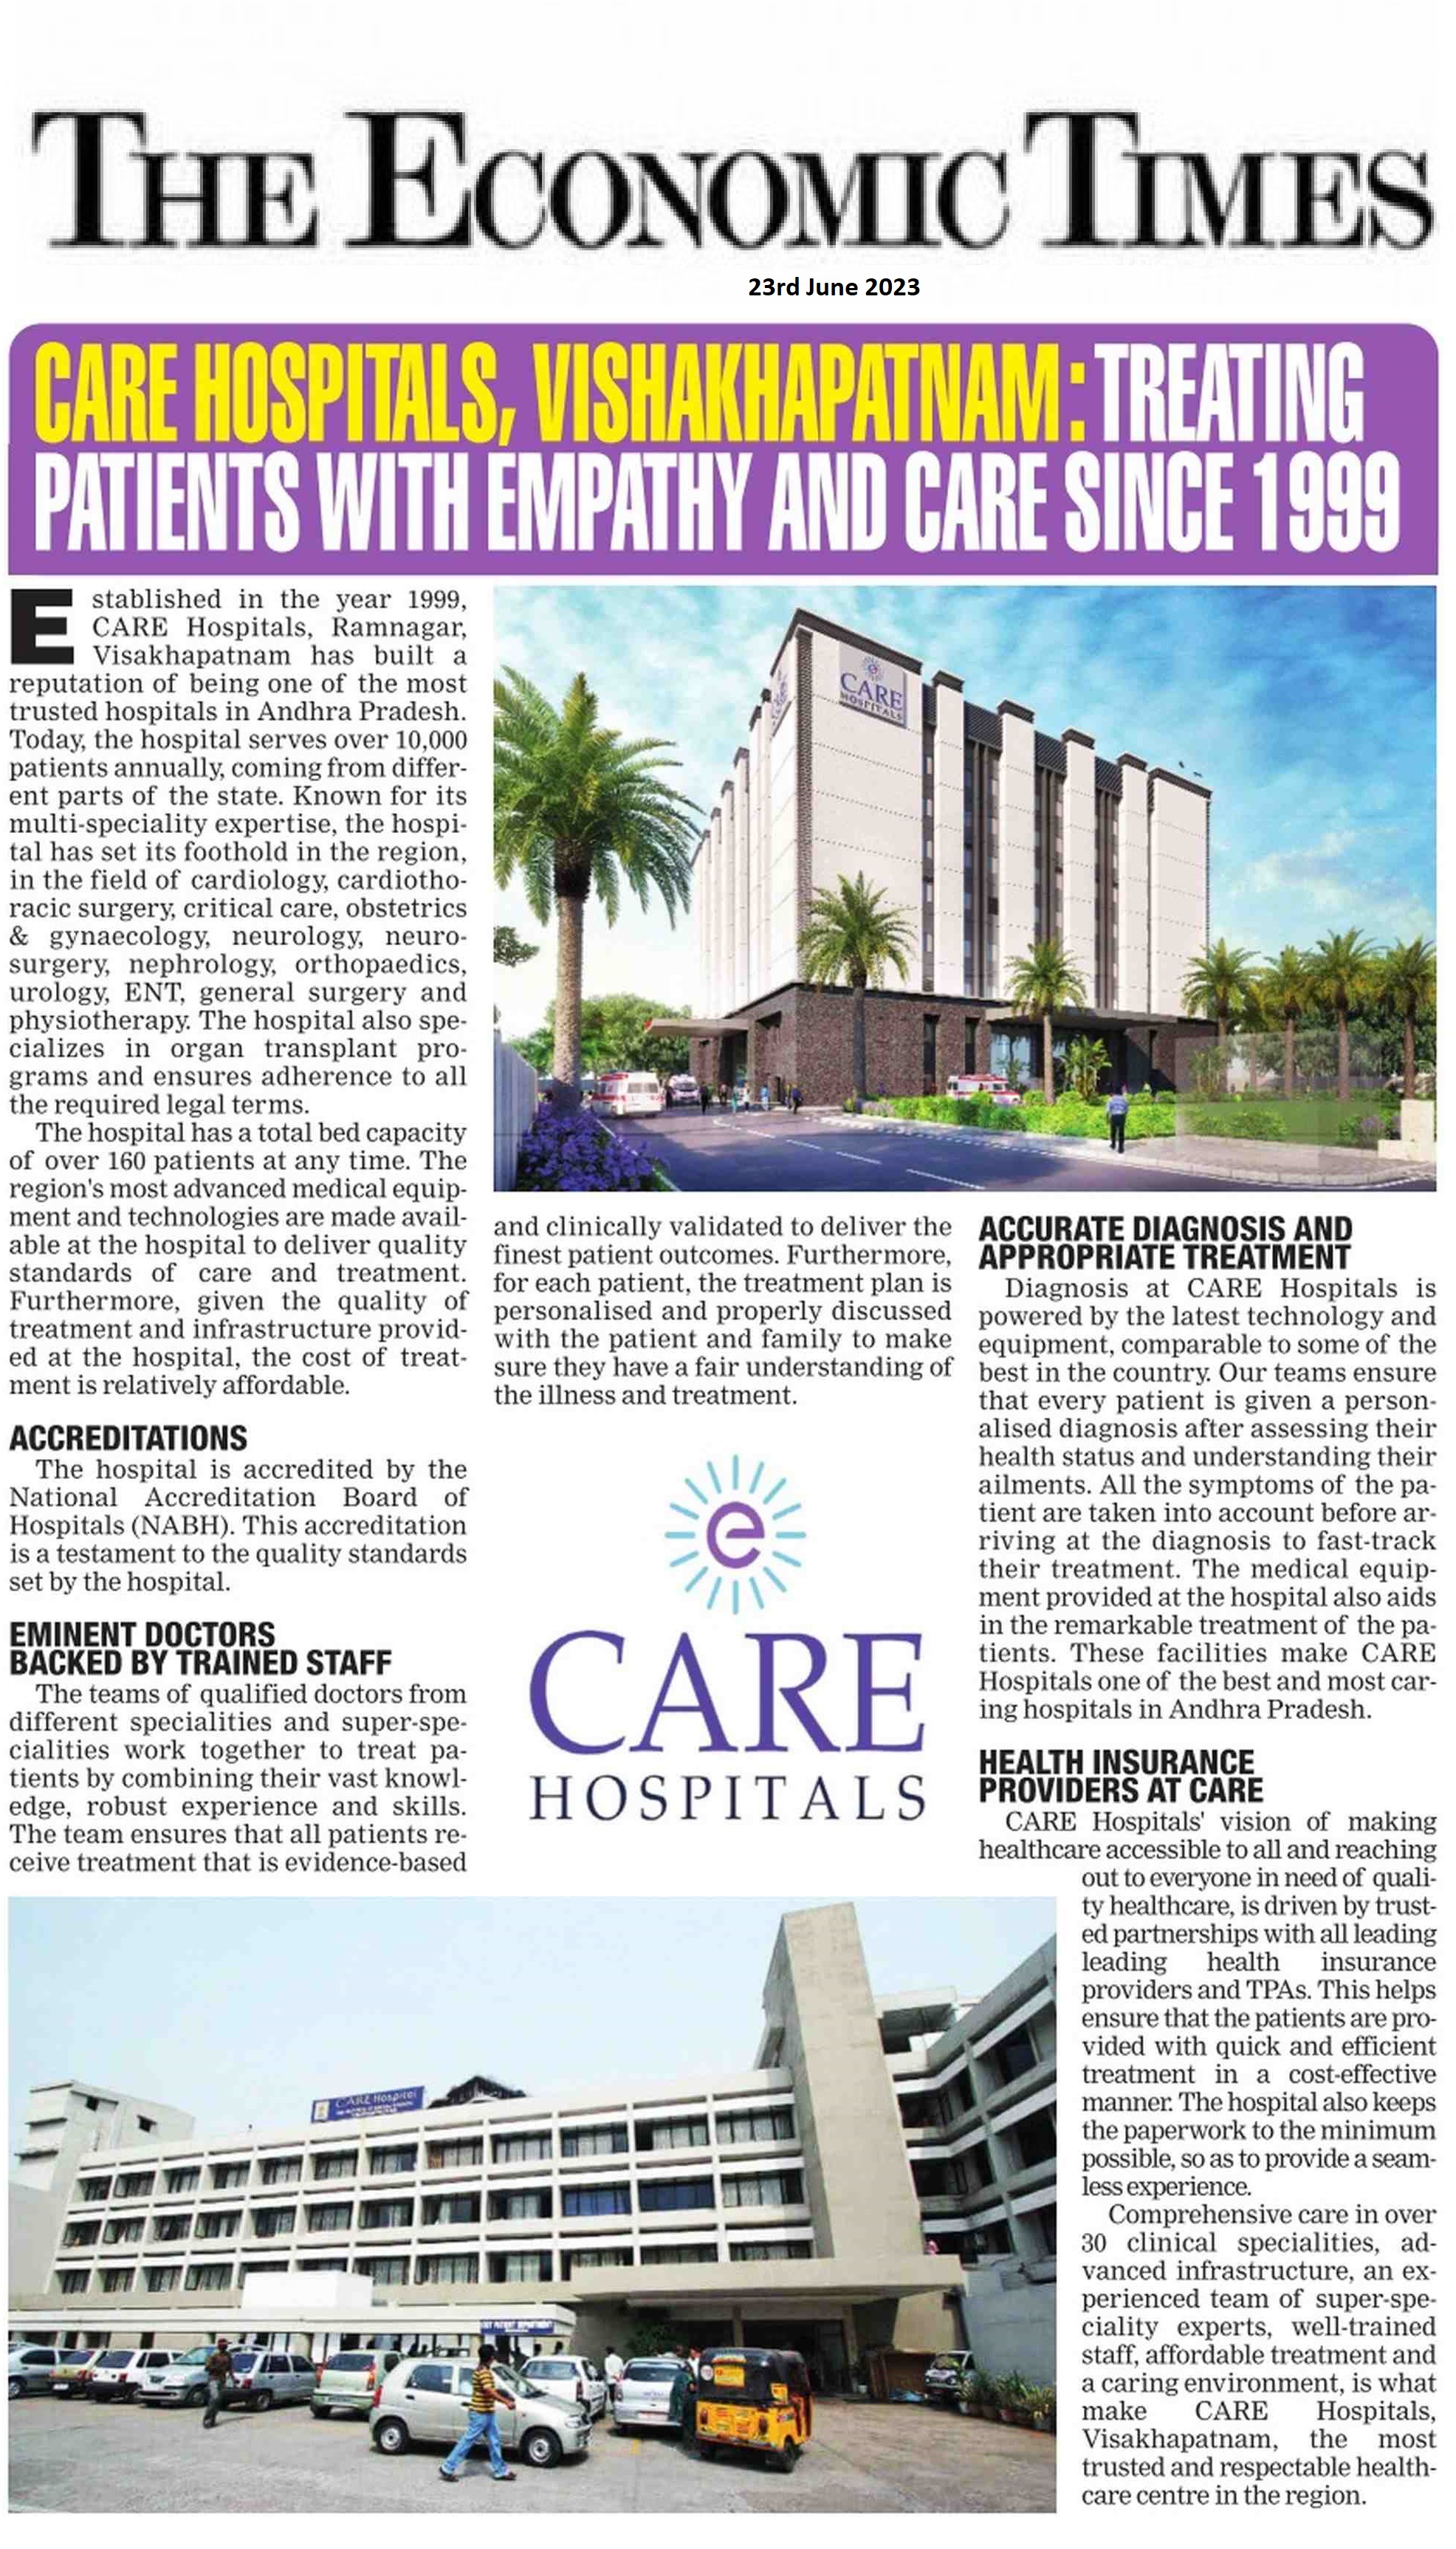 CARE Hospitals Visakhapatnam Treating Patients with Empathy and CARE Since 1999 News Article in Economic Times